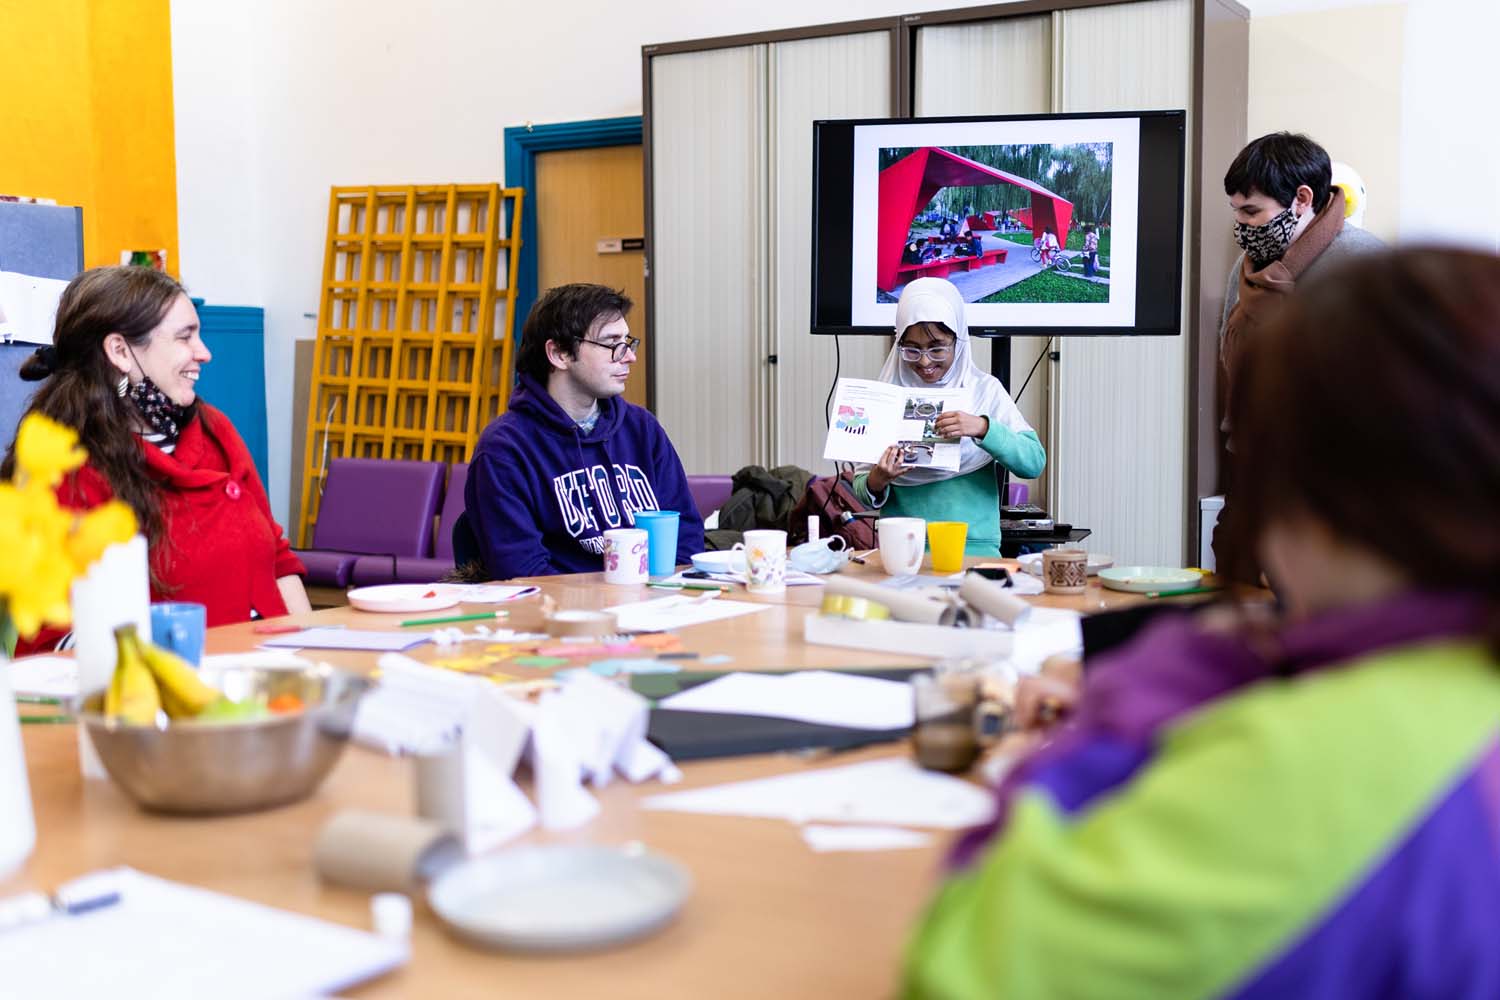 A young girl in a hijab presenting her work in a workshop to a group of people. A red canopy in the park is presented on the screen behind her.